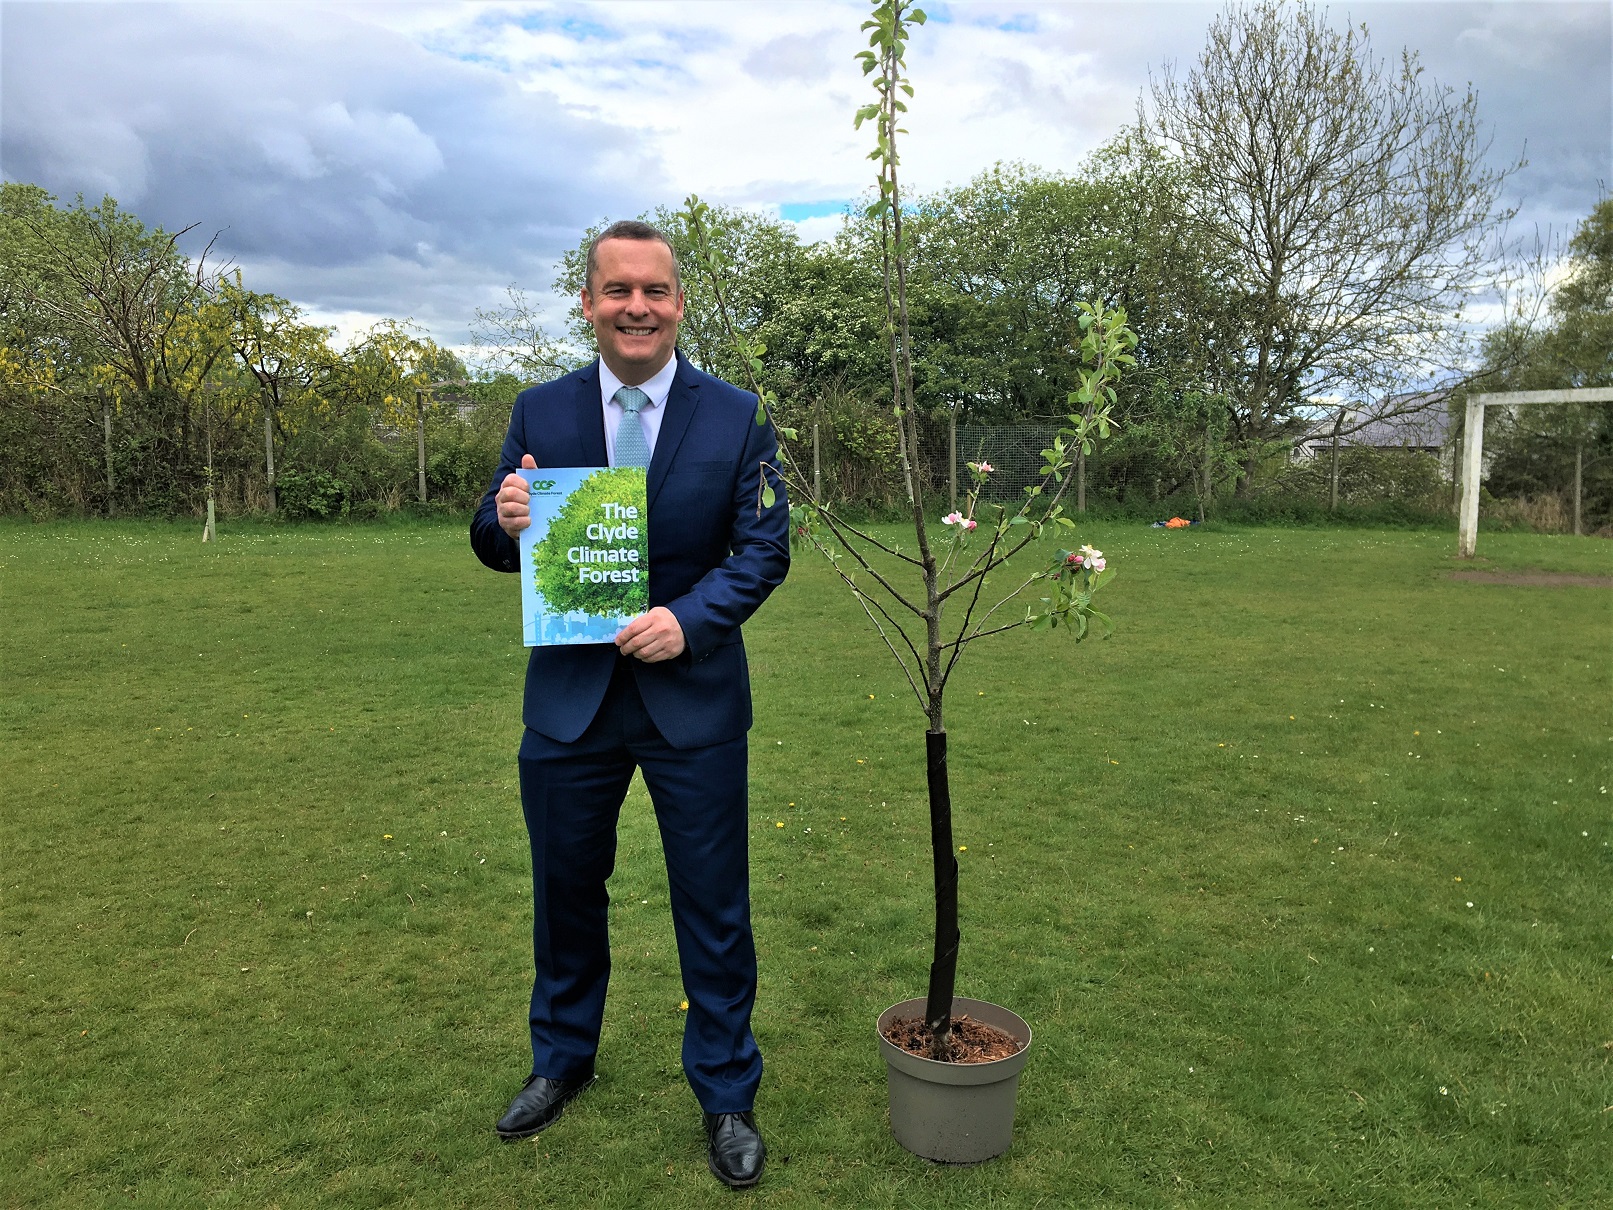 Cllr Polson launches Clyde Climate Forest